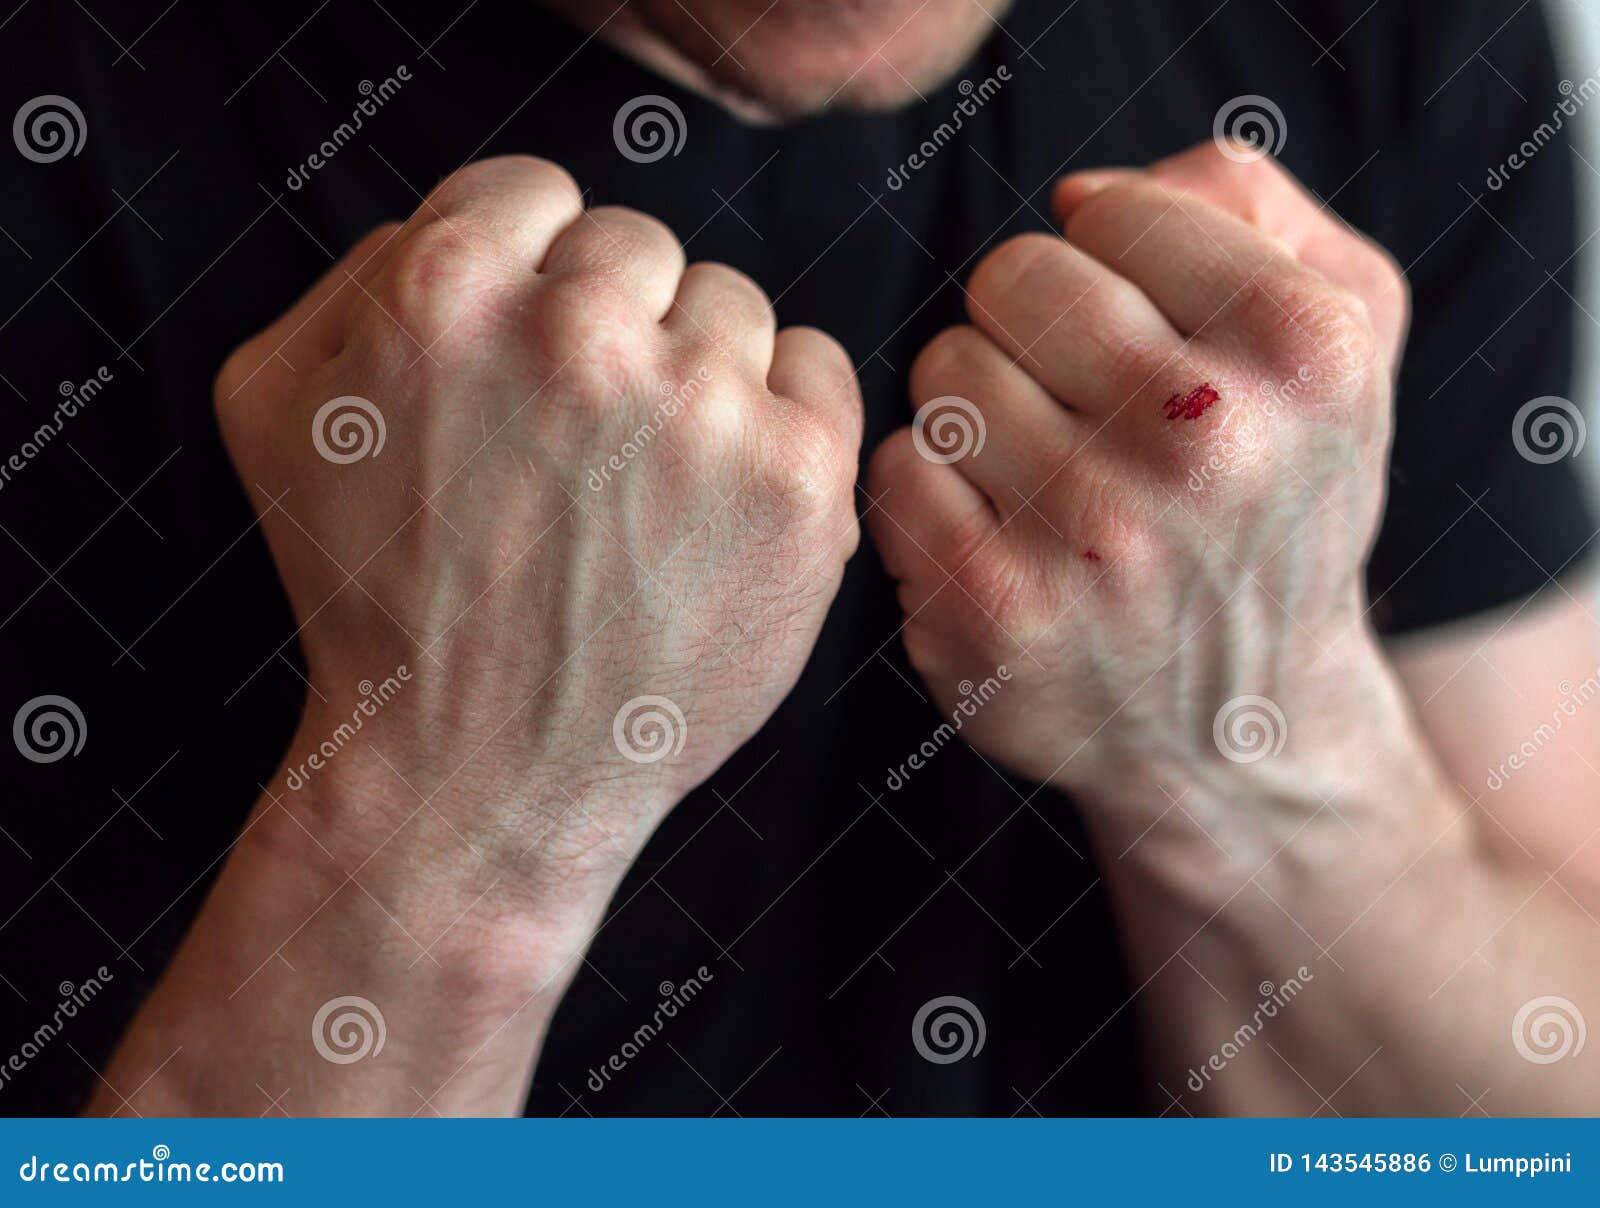 boxing-fists-blood-close-up-motivation-boxing-fists-blood-close-up-motivation-boxing-143545886.jpg